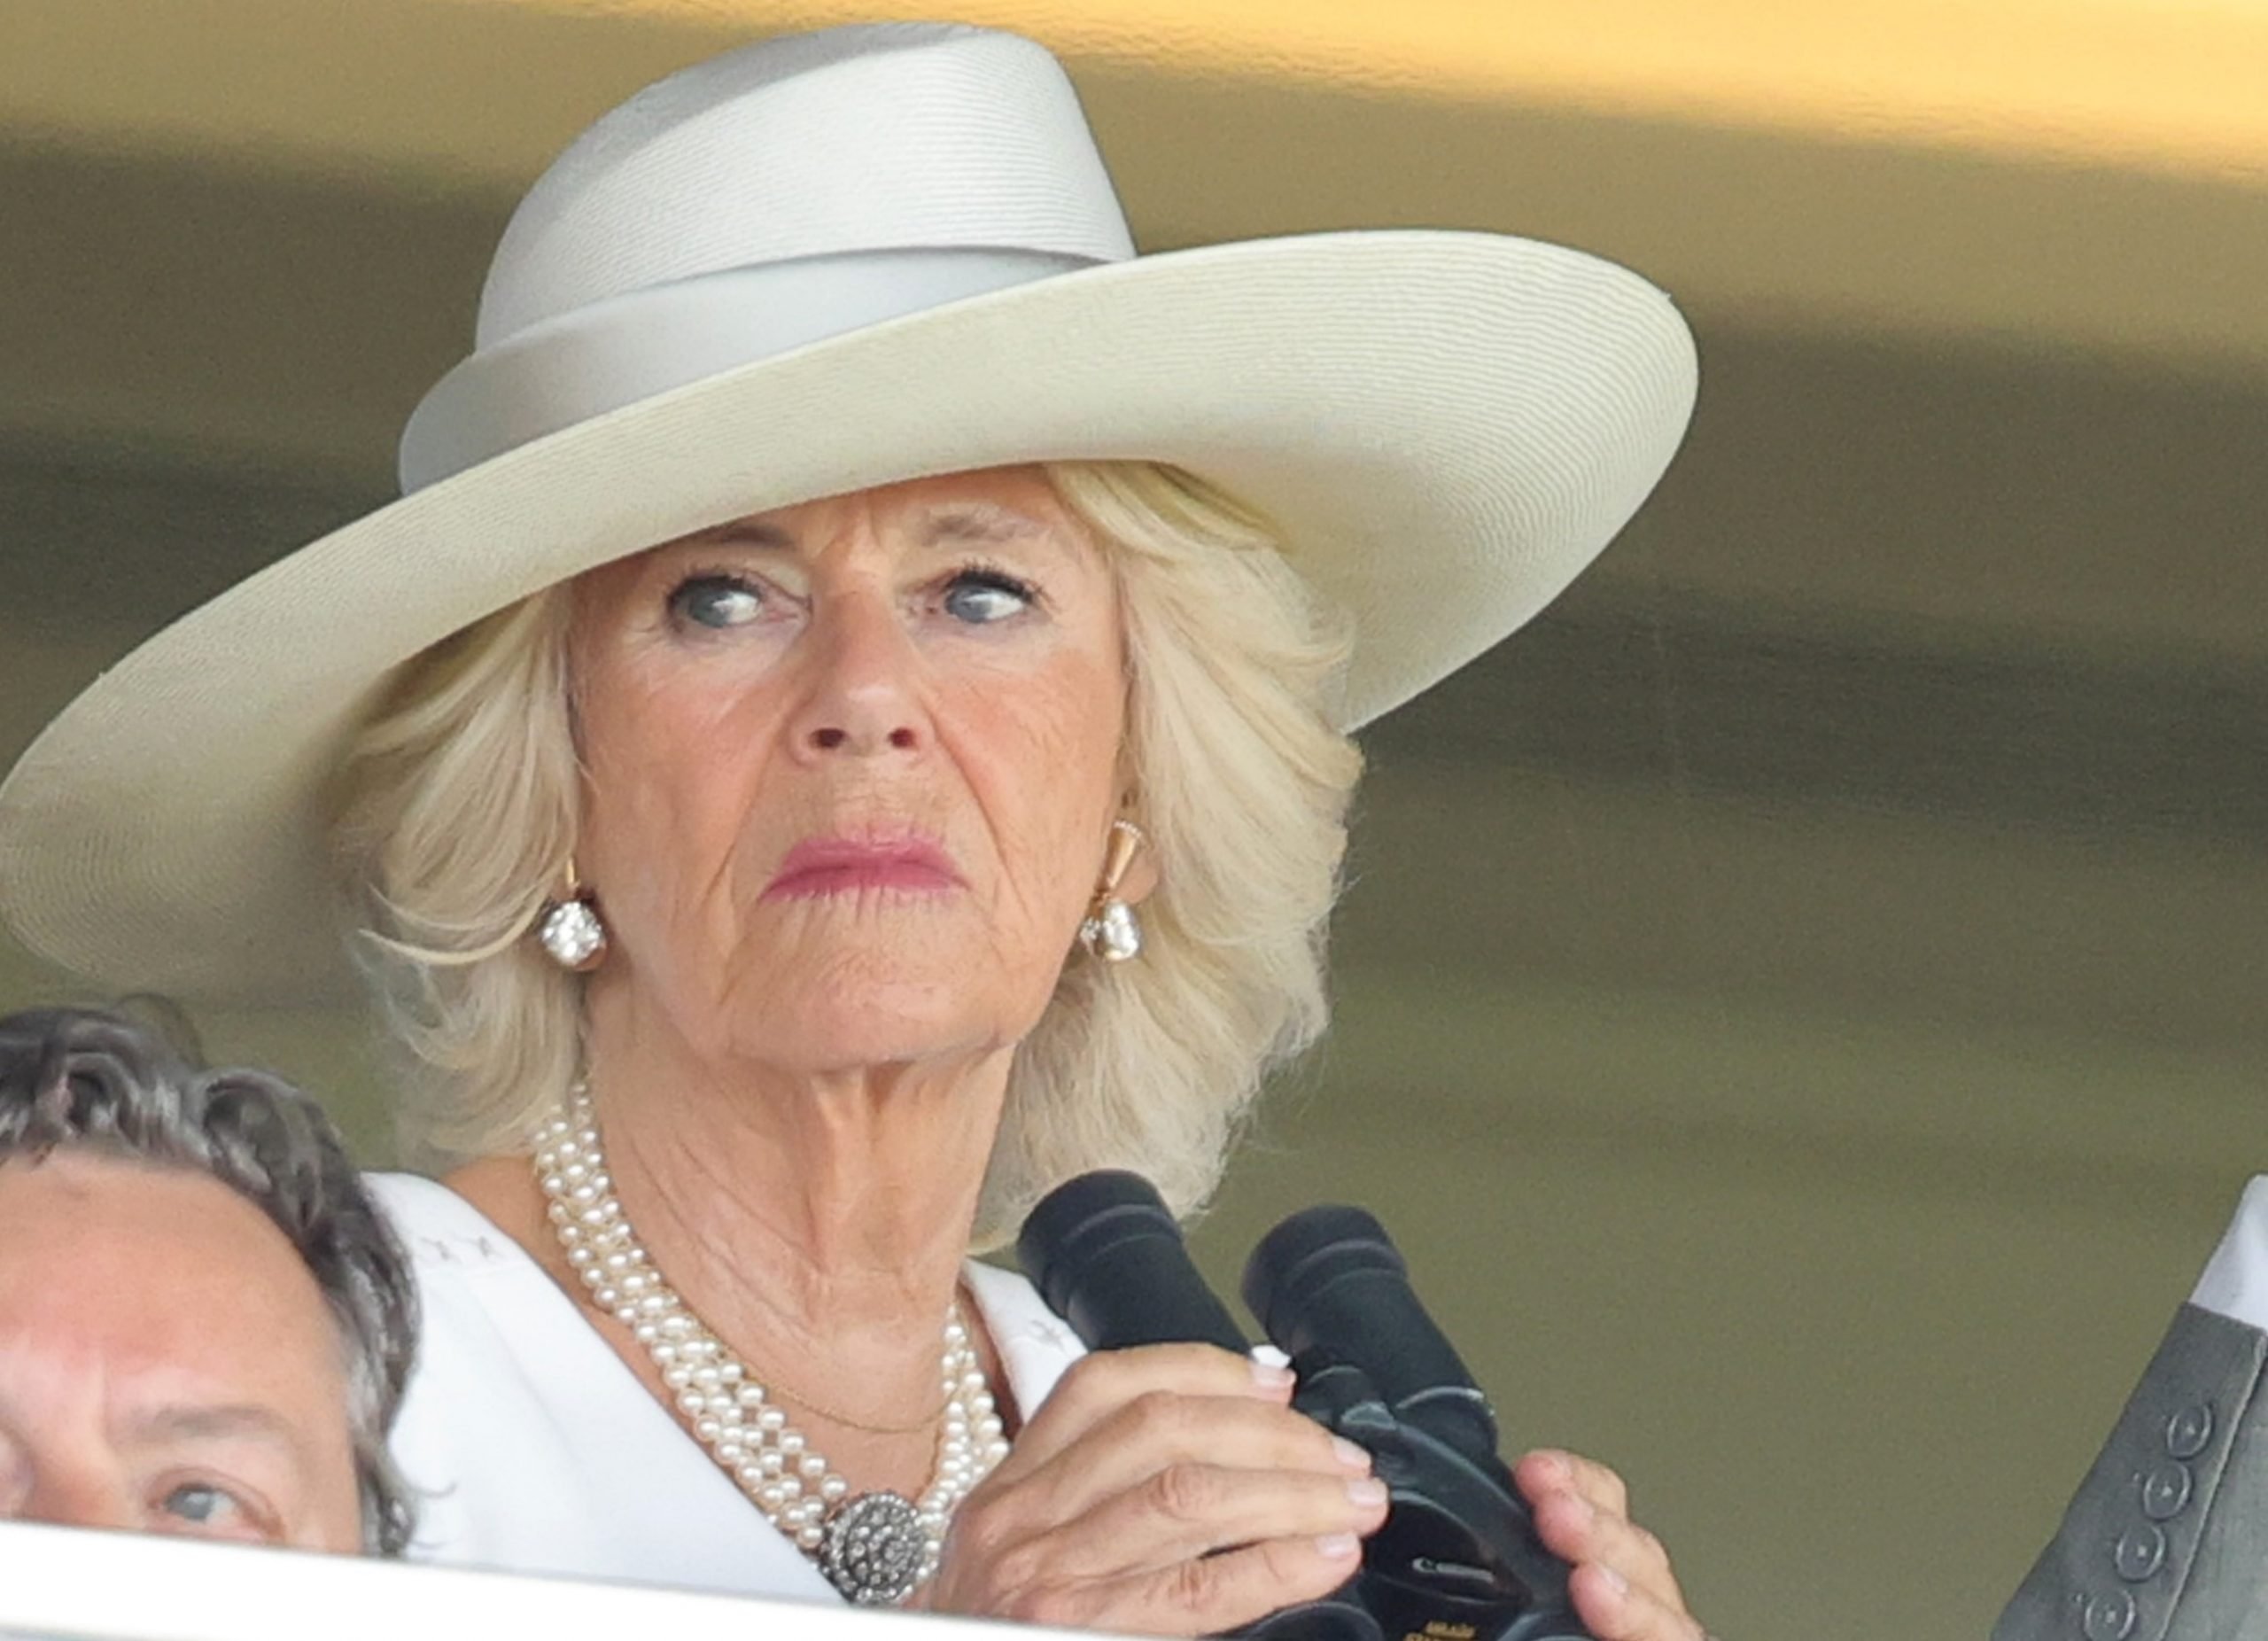 Camilla Parker Bowles, who was "scrutinized" for affair with Prince Charles, holding binoculars at the Royal Ascot